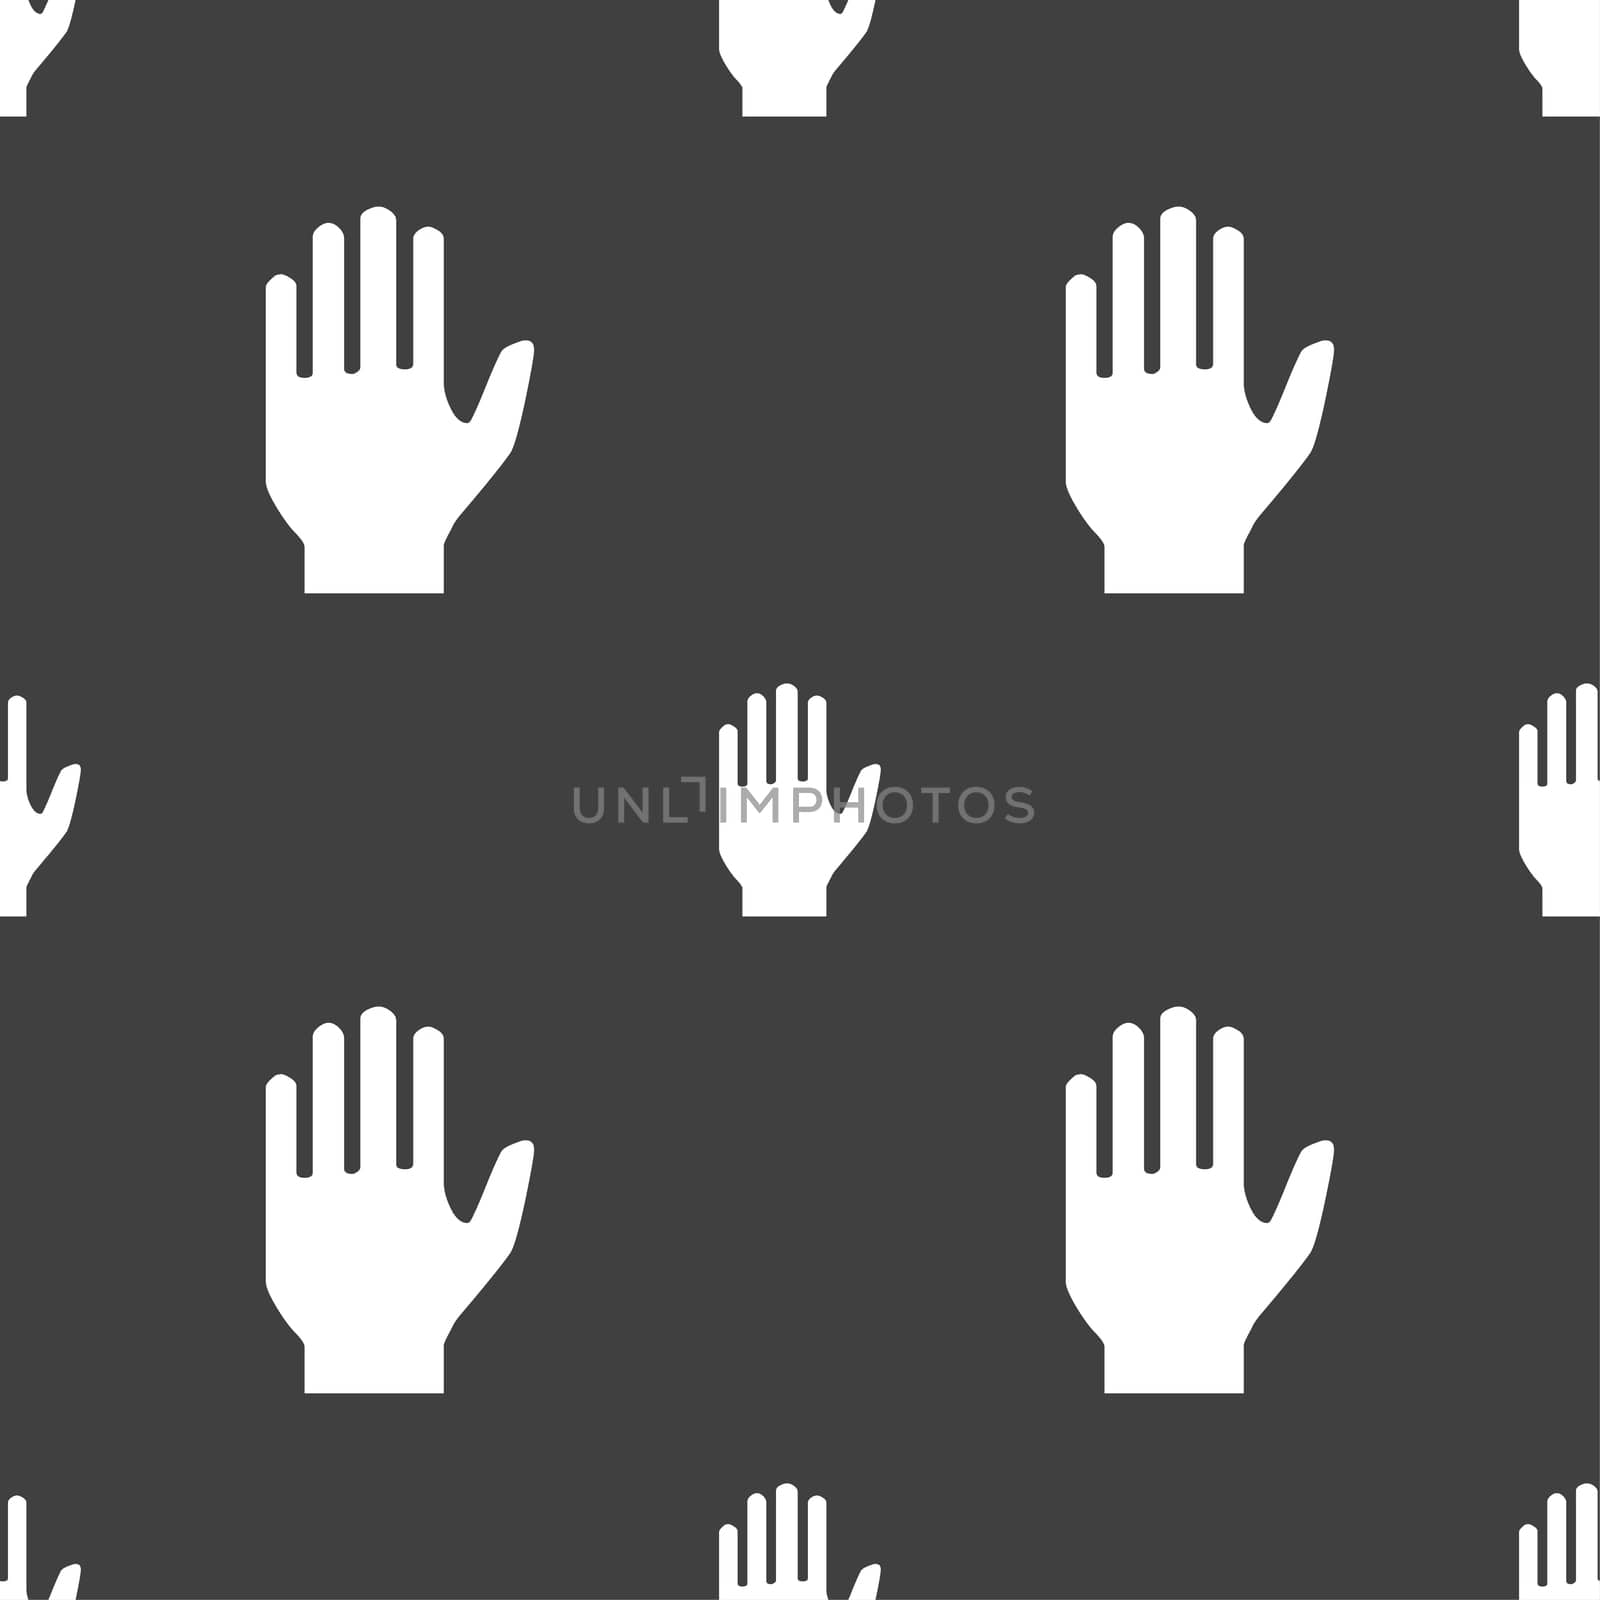 Hand print sign icon. Stop symbol. Seamless pattern on a gray background. illustration